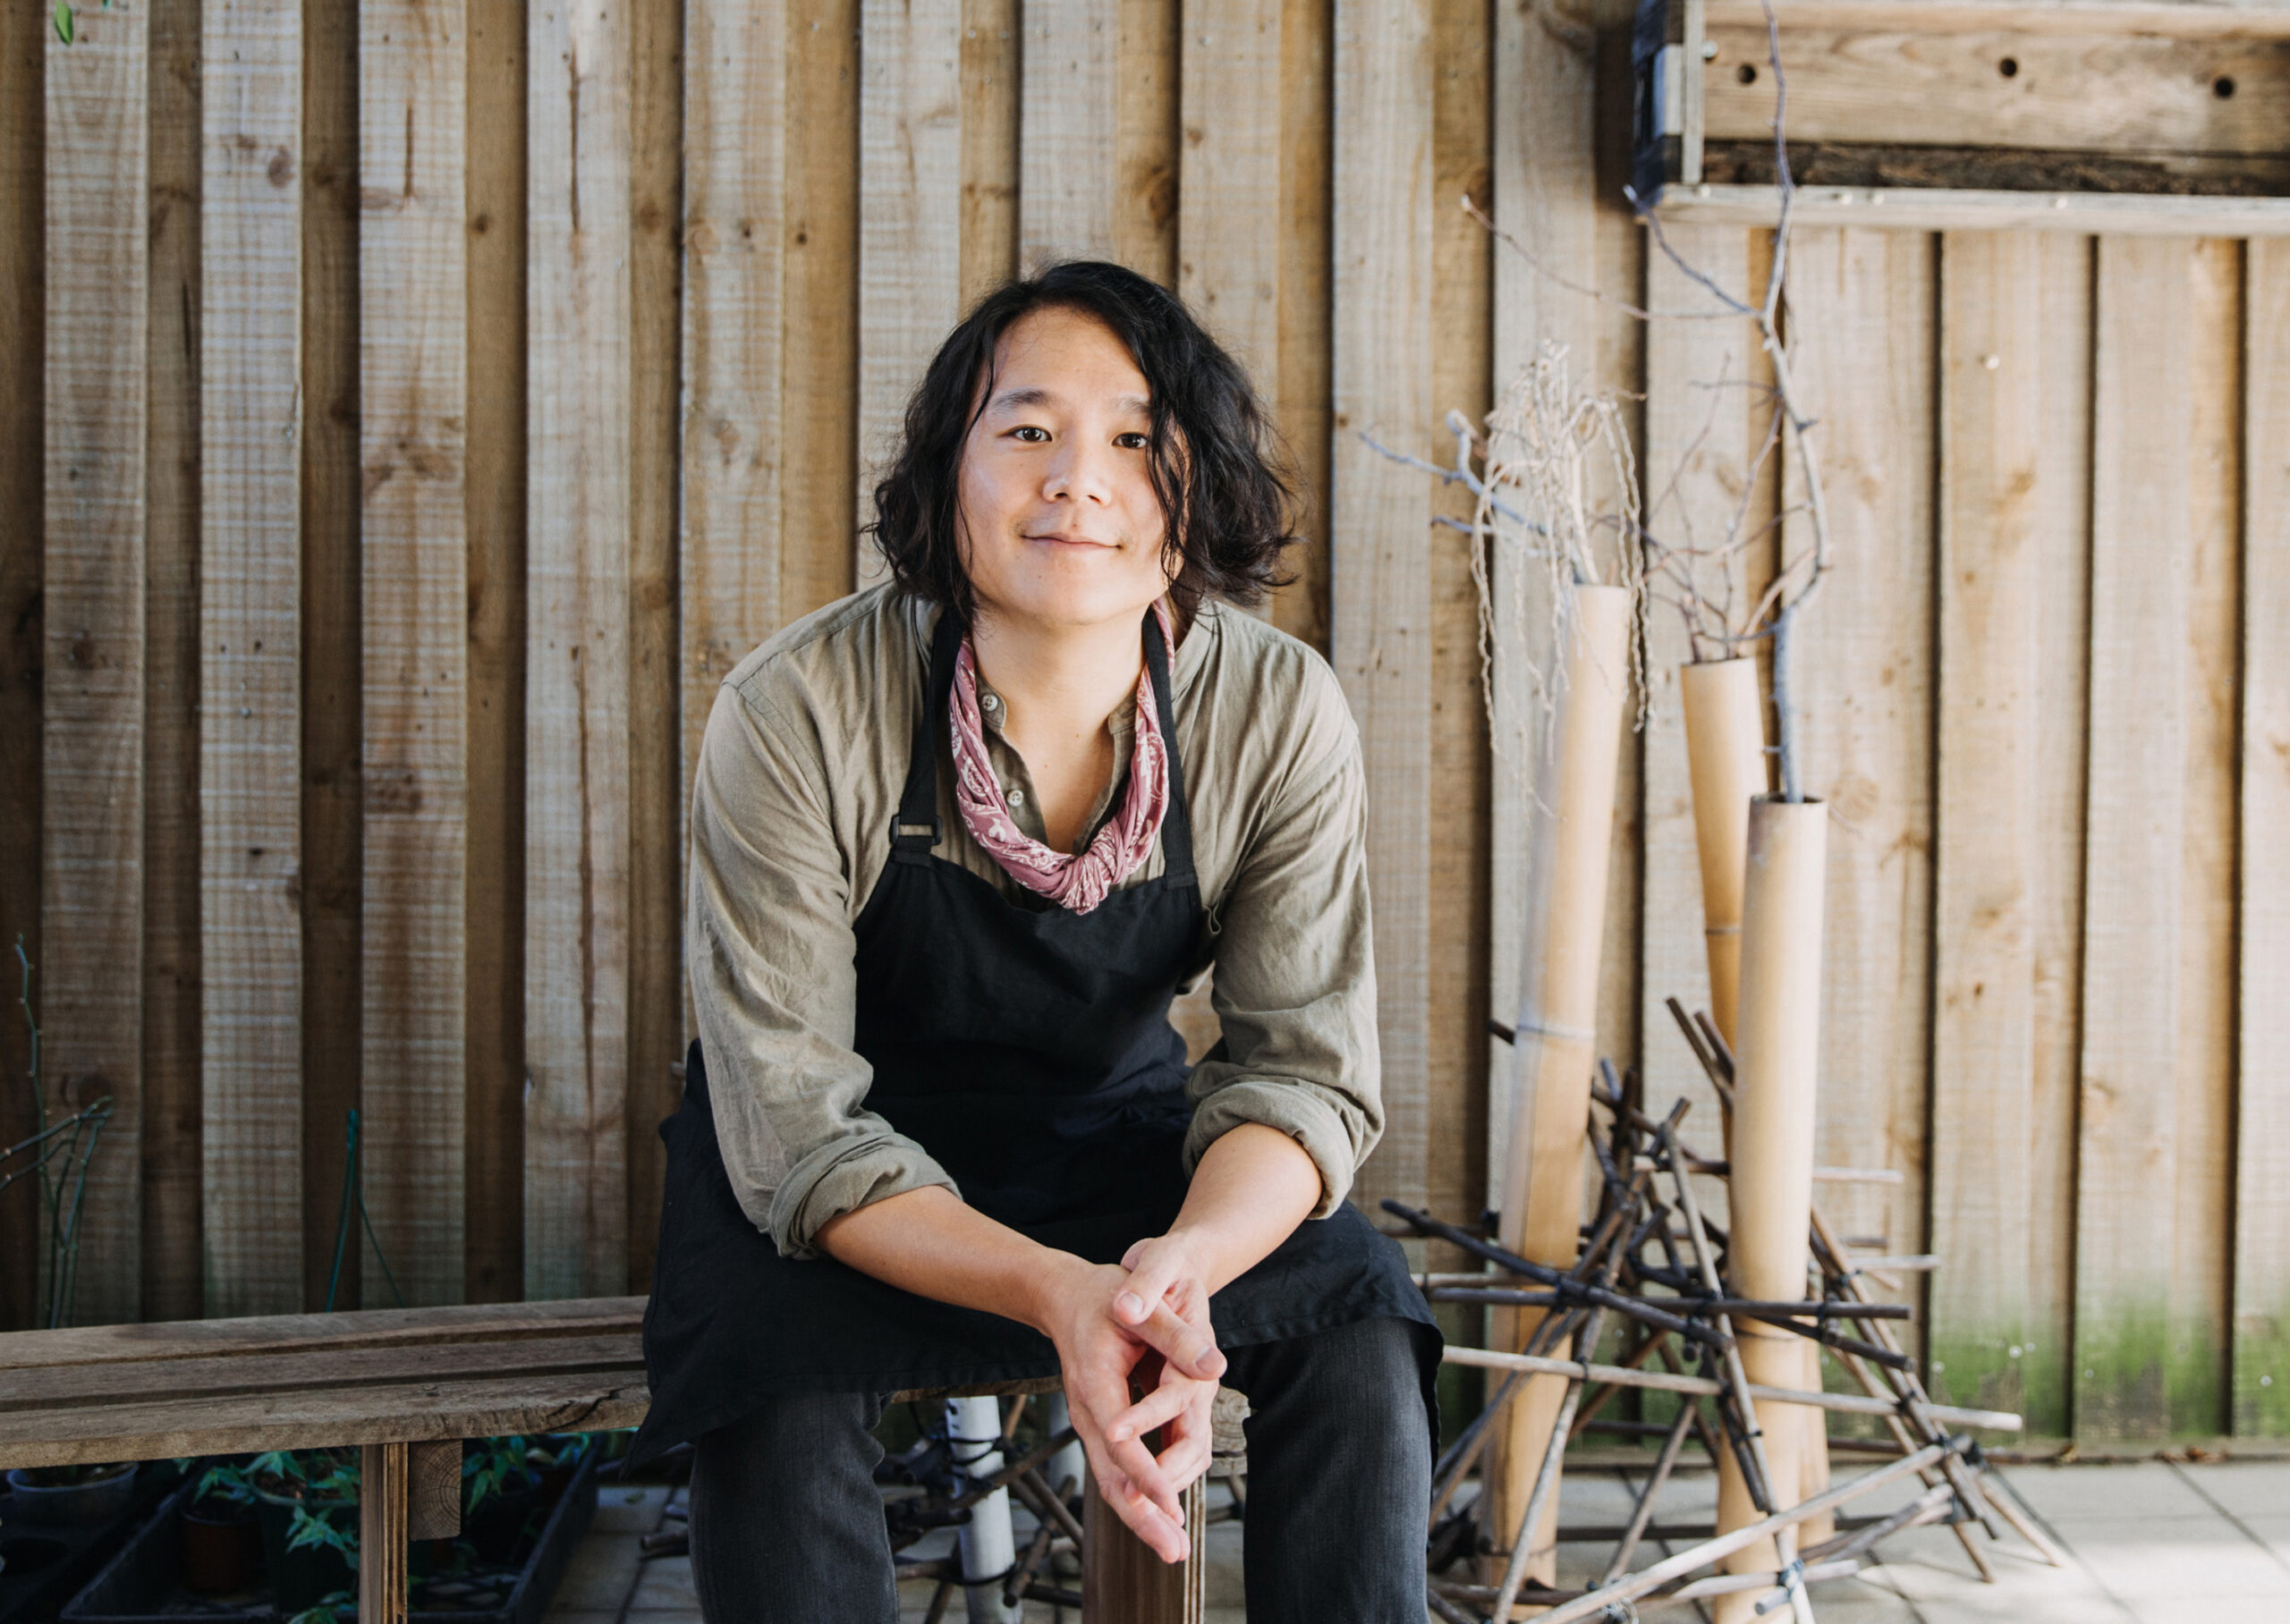 Matt Hsu looking into the camera surrounded by a wood fence and on a wood bench, there are brambles and branches sticking out of tubes and sticks scaffolding them. He is wearing a worker's apron and is sitting, looking warmly into the camera